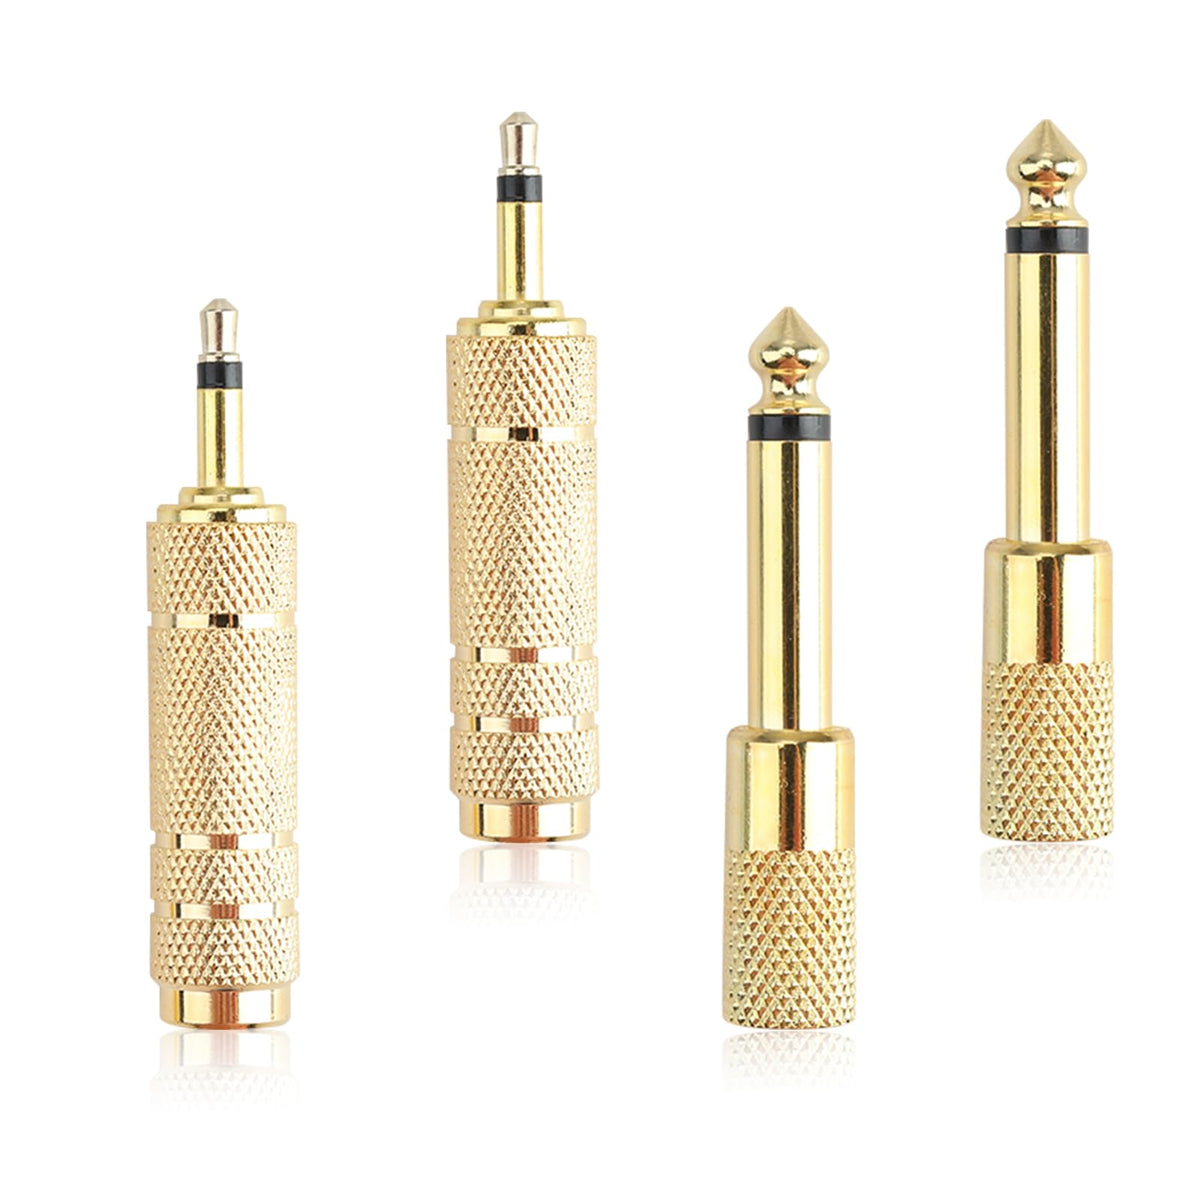 4pcs Headphone Adapter Jack, Gold Plated Audio Stereo Plug Adapter, 6.35 Mm (1/4 Inch) Male to 3.5 Mm (1/8 Inch) Female Stereo Adapter Plus 3.5 Mm (1/8 Inch) Male to 6.35 Mm (1/4 Inch) Mono Female